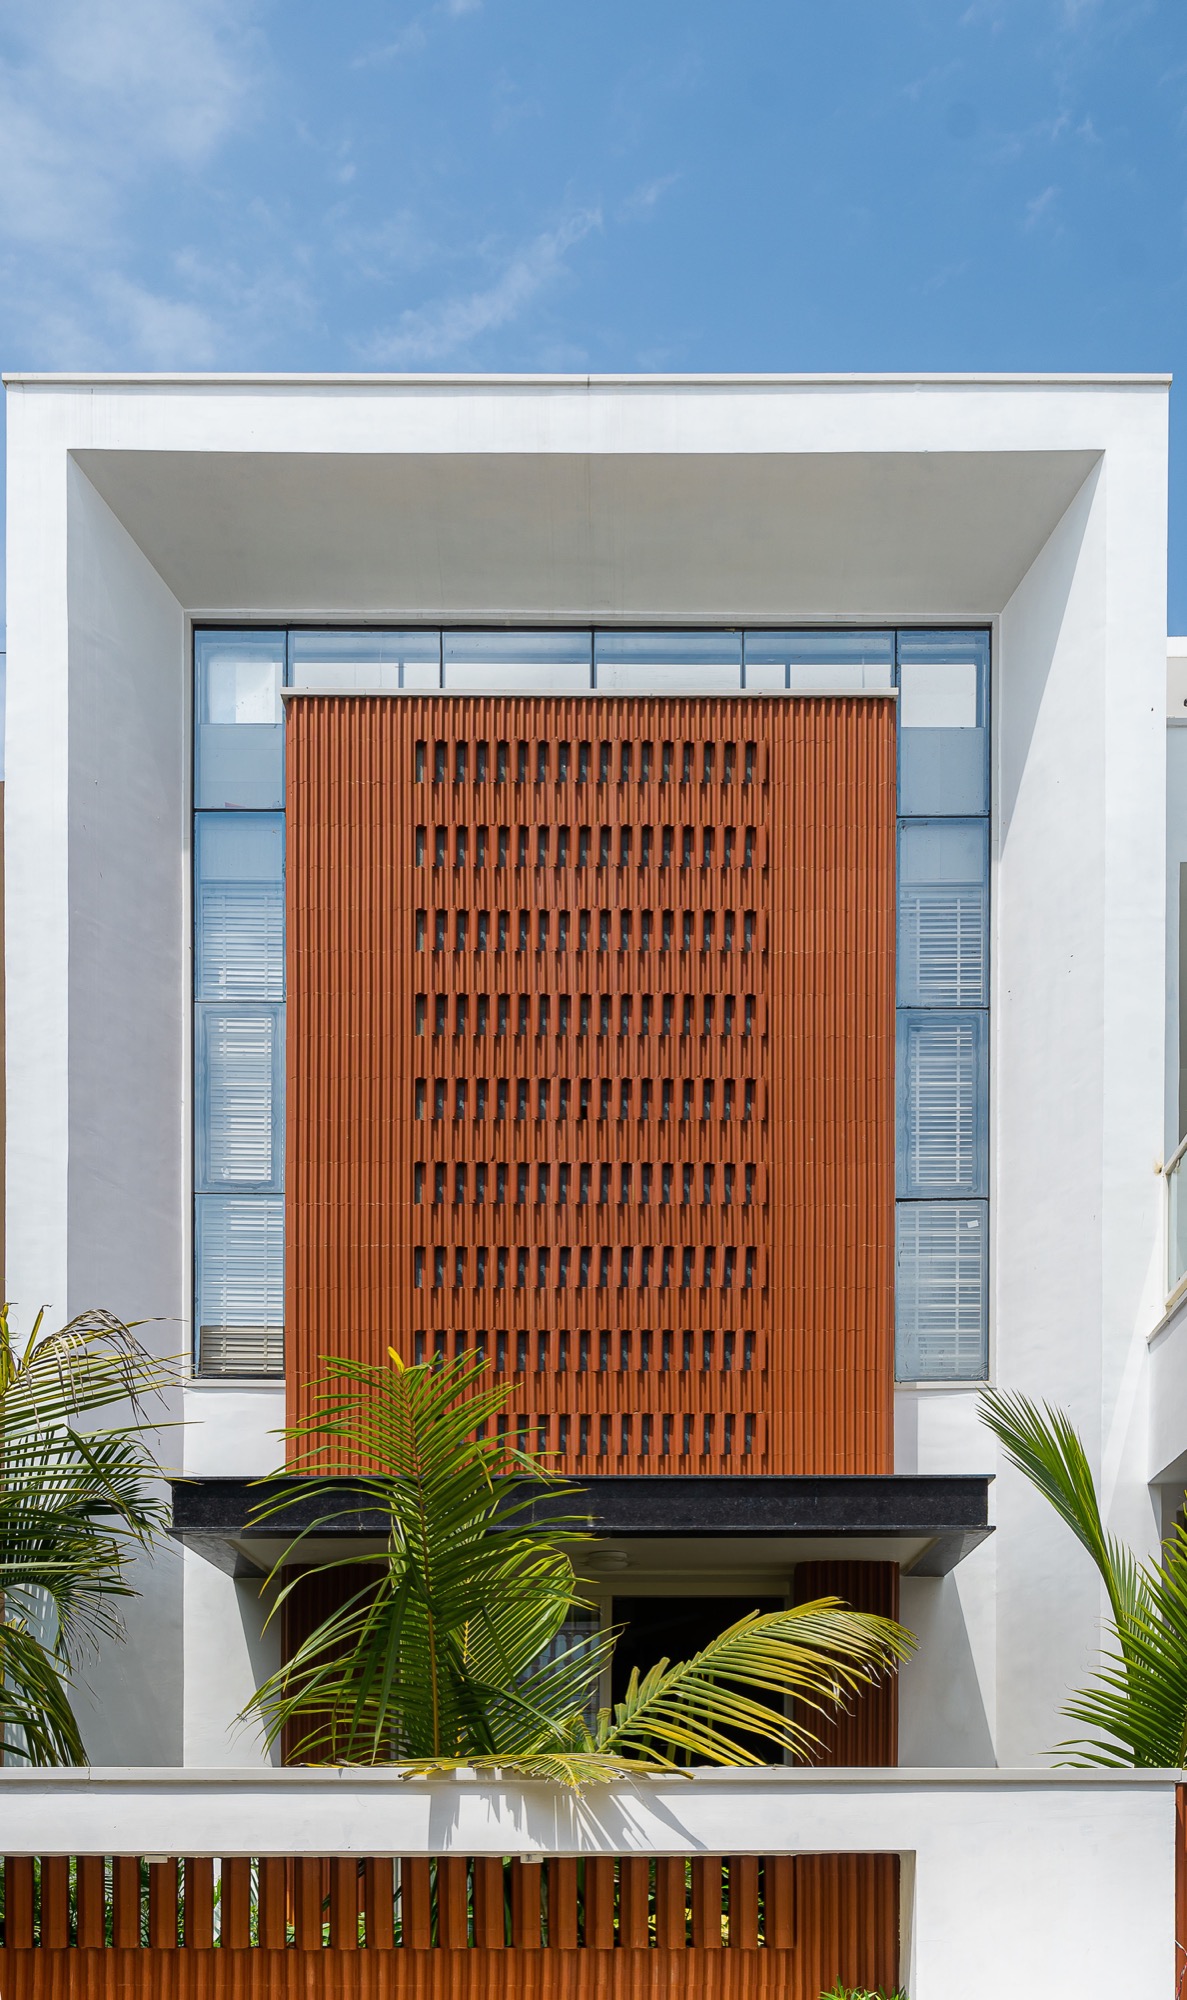 Manoj Patel Design Studio reuses the clay roof tiles in Vadodara residence to minimize the glare from direct sun light. 6